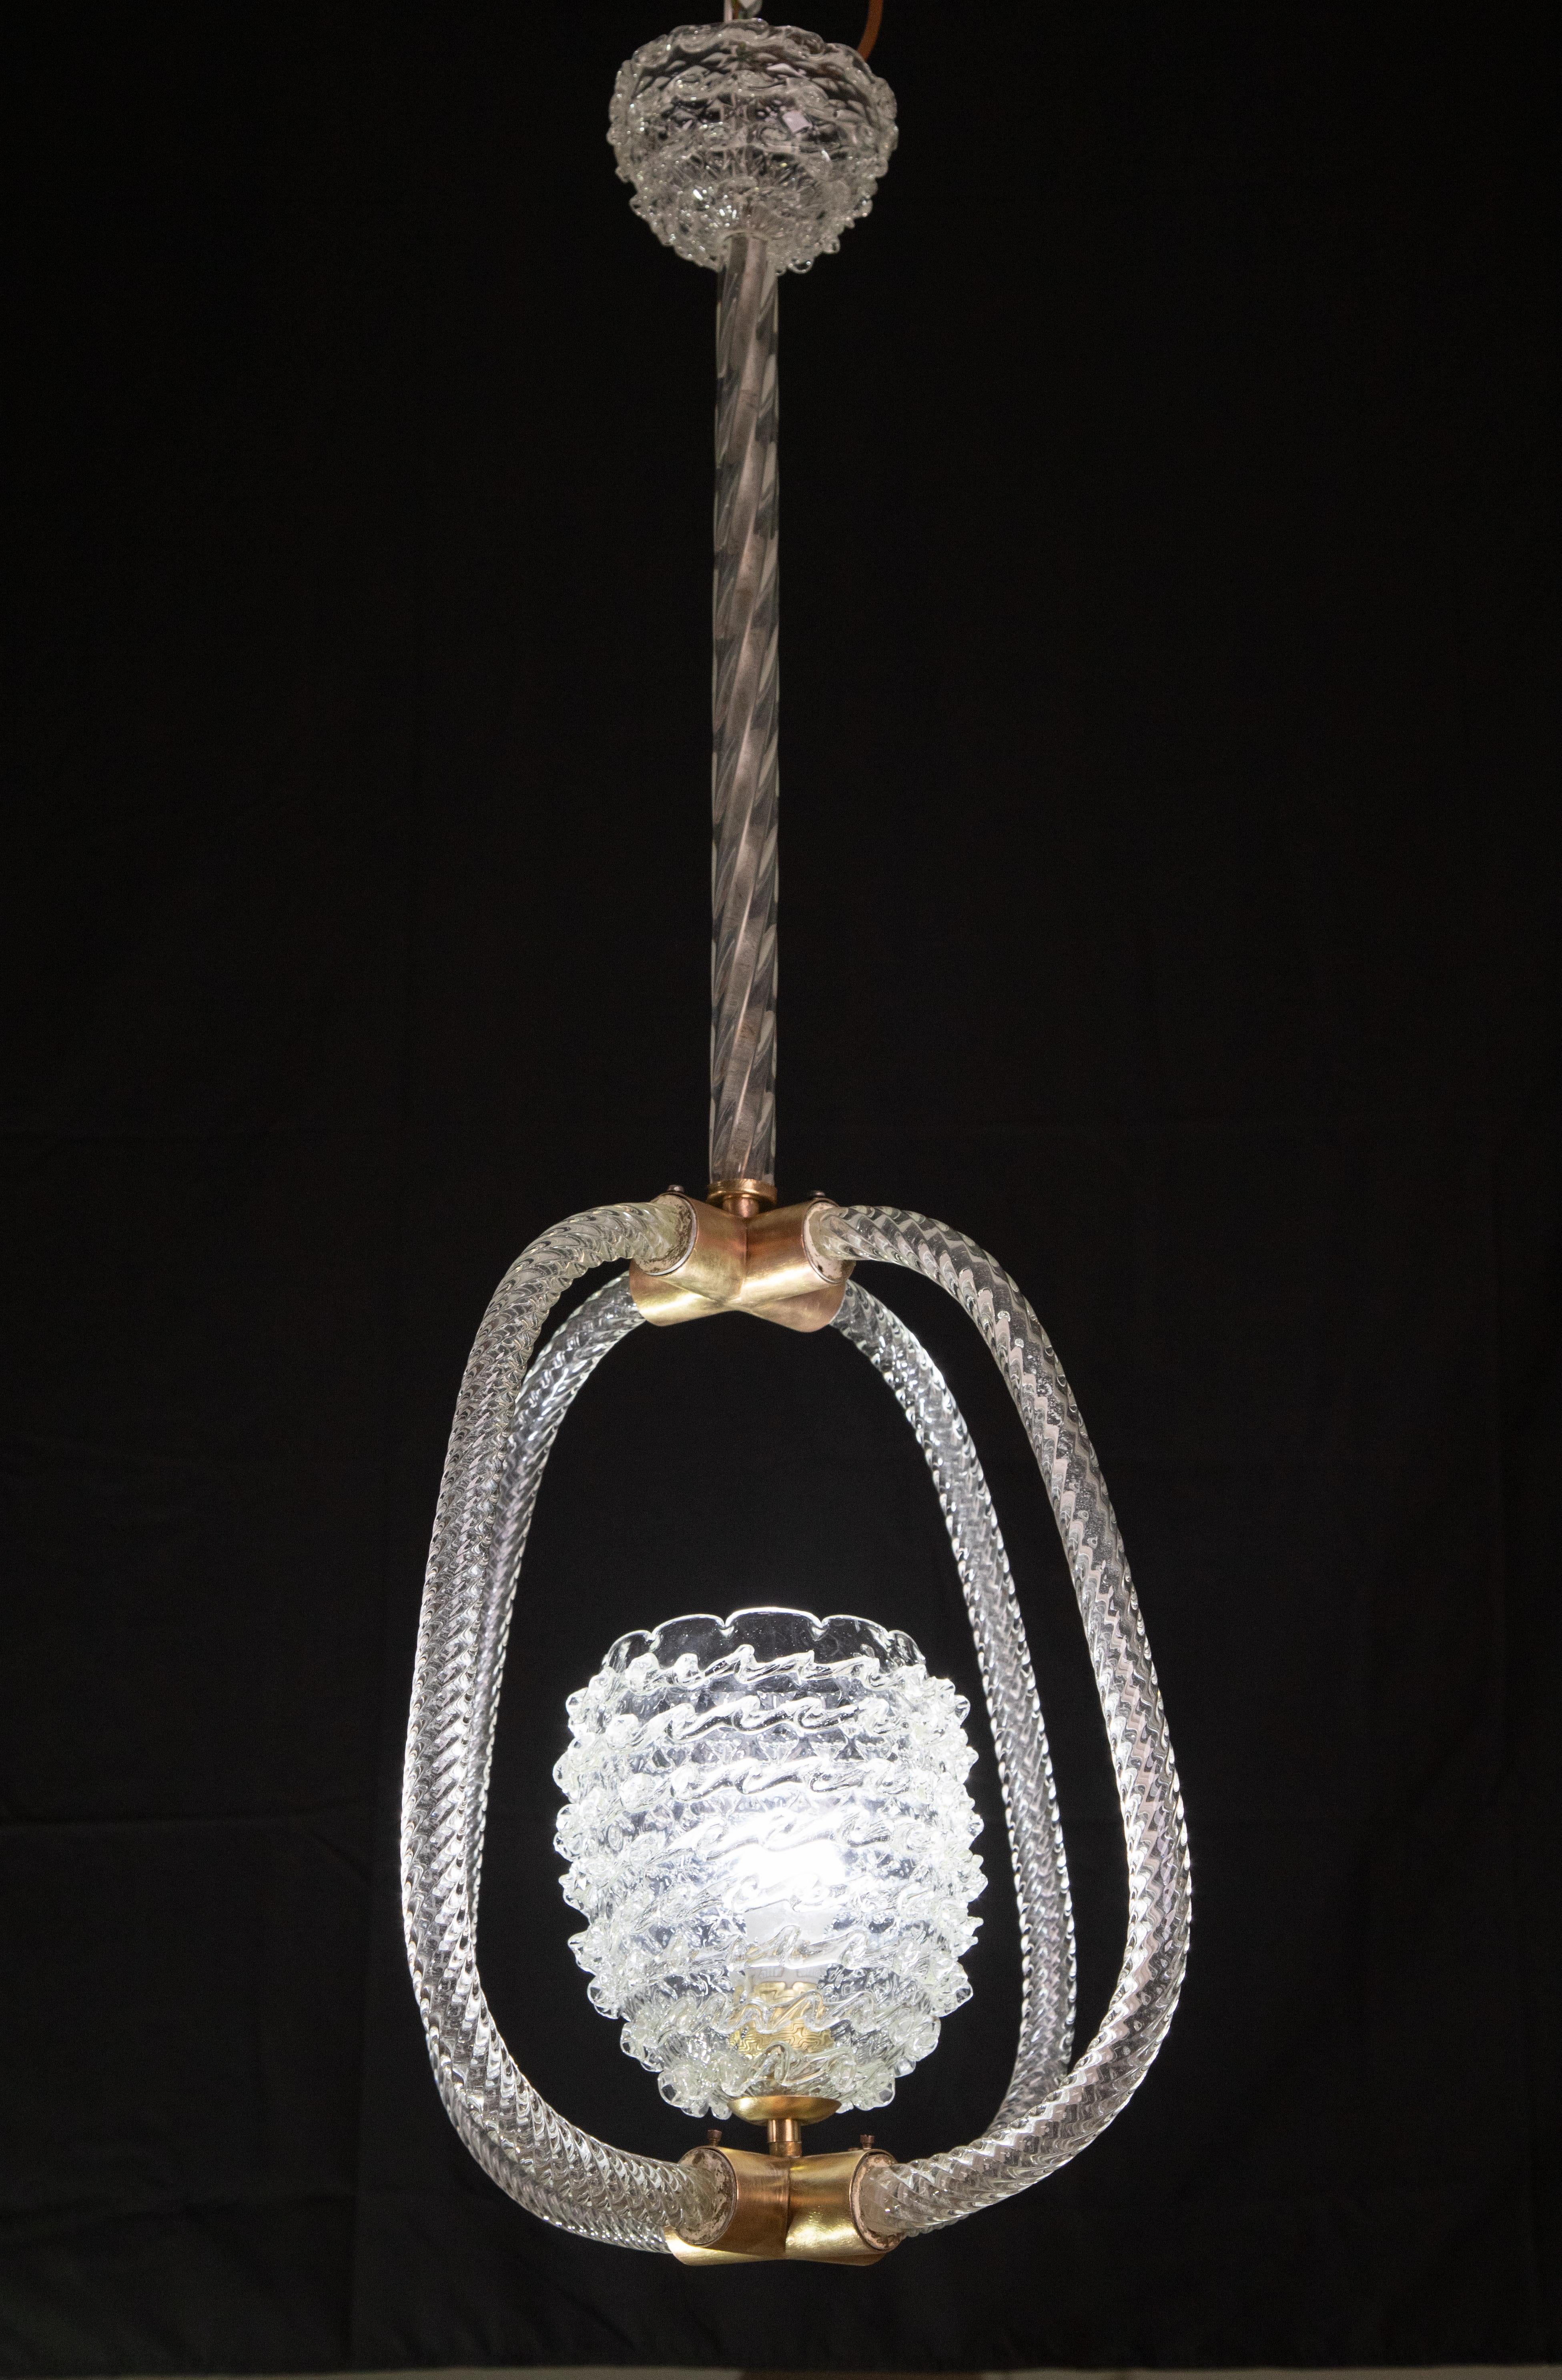 Splendid Art Deco chandelier attribuited to Ercole Barovier made by the glassworks Barovier & Toso in the 1940s-1950s.
The chandelier is 100 cm high and measures 40 cm wide.
The glass elements make this pendant extremely unique.
All the glass and